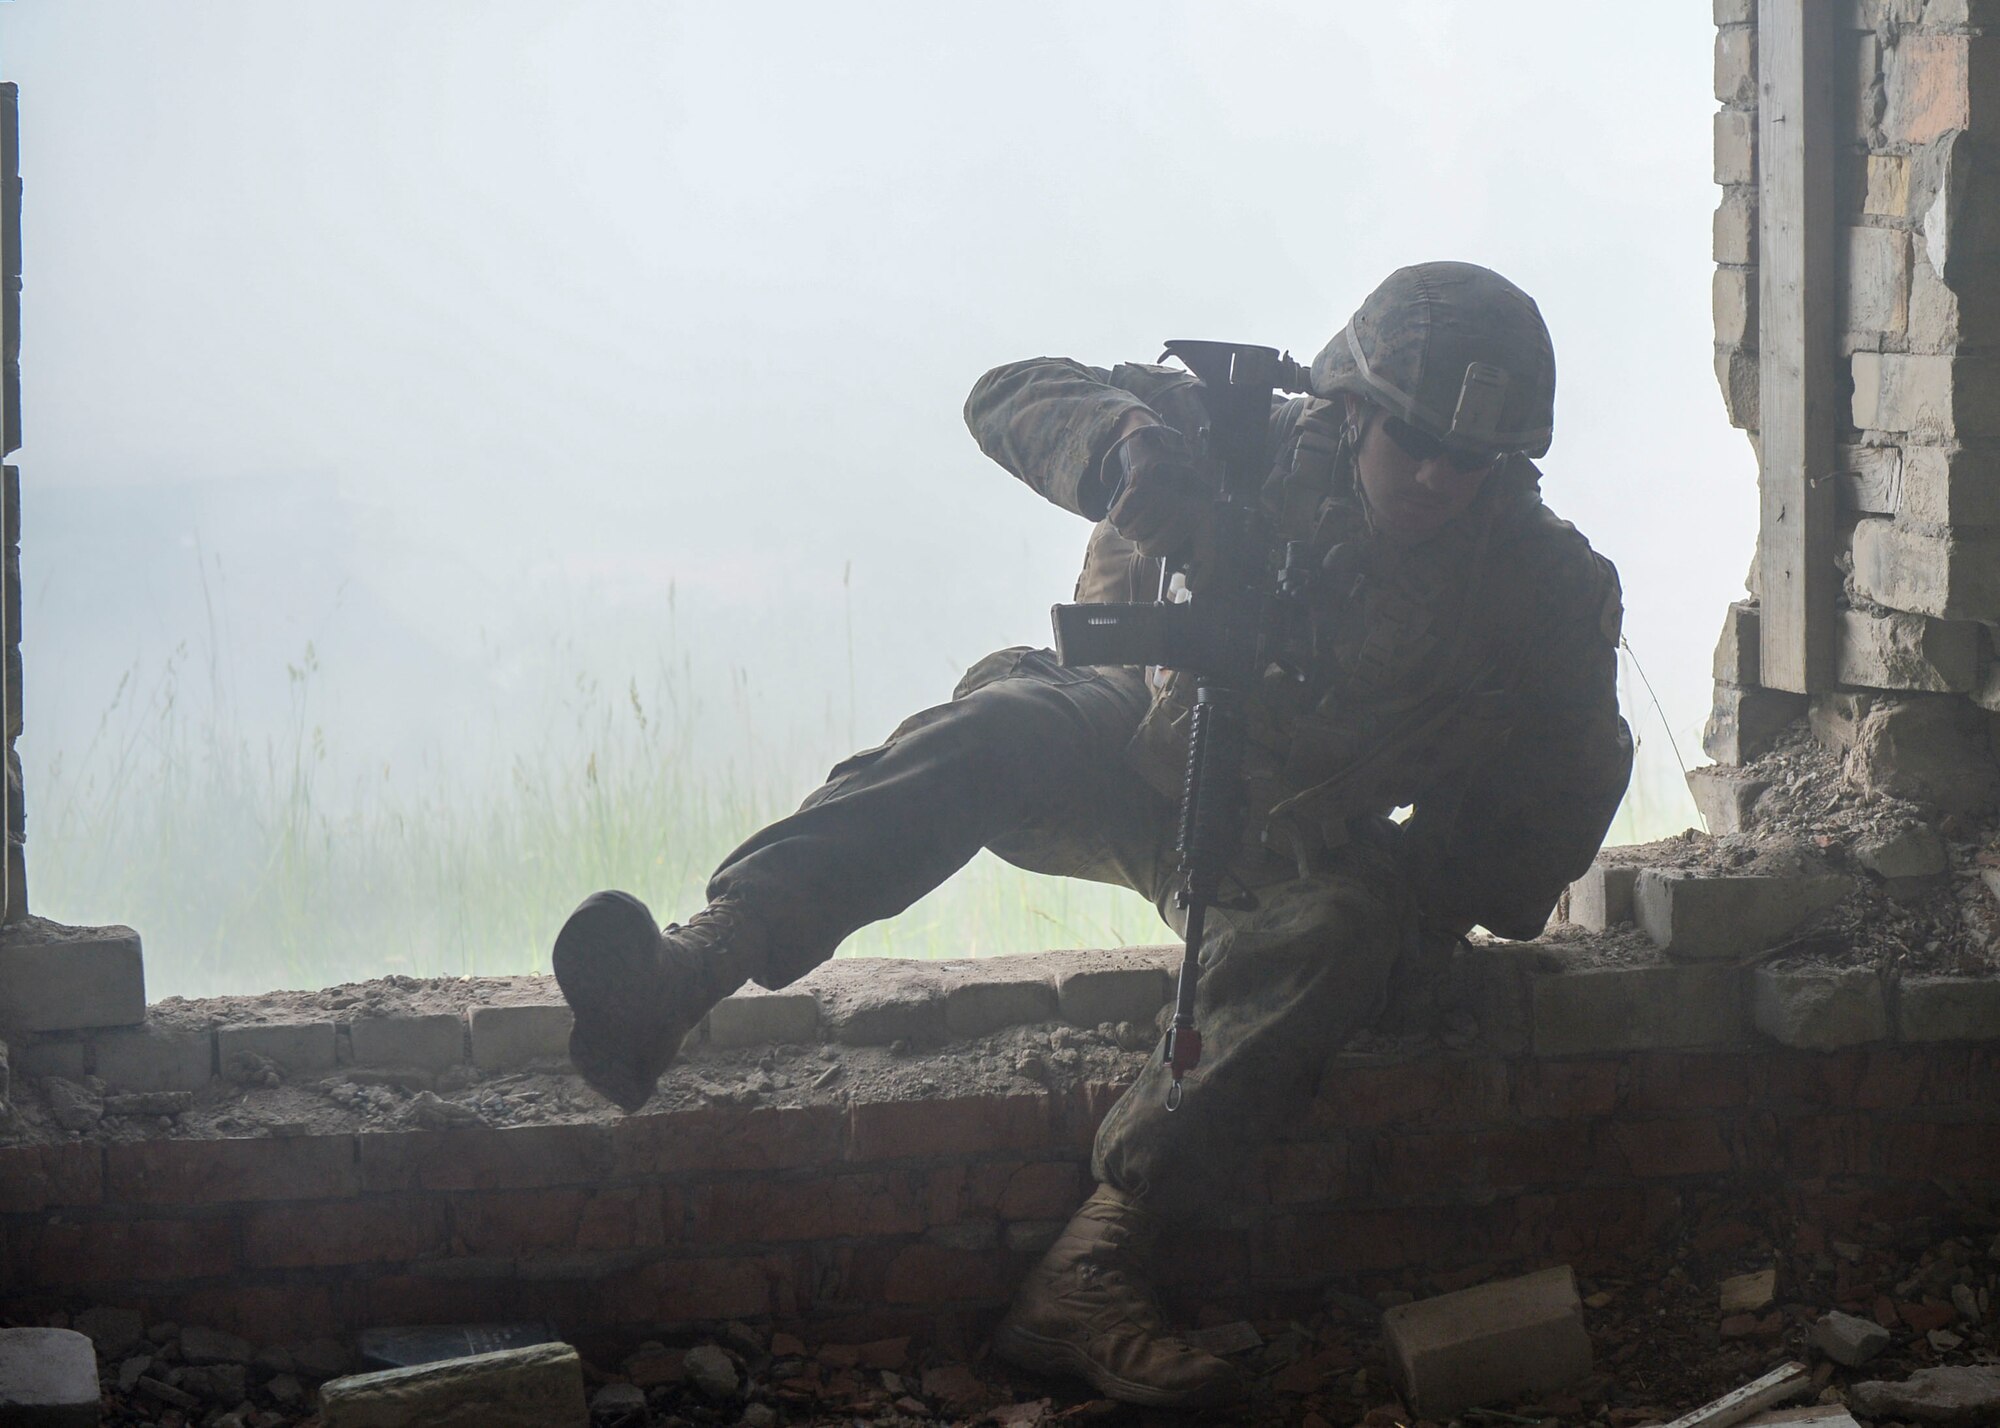 A U.S. Marine breaches a building during a large scale battle scenario during Saber Strike 18 in Skrunda, Latvia on June 13, 2018. U.S Marines teamed with United Kingdom Royal Marines, Michigan Army National Guard, and Norwegian Forces as the attacking force whose objective was to remove opposing forces. Saber Strike aims to improve strategic partnerships, ability to operate in the dynamic security environment, and to maintain readiness of forces. (U.S. Air Force photo by Staff Sgt. Jimmie D. Pike)